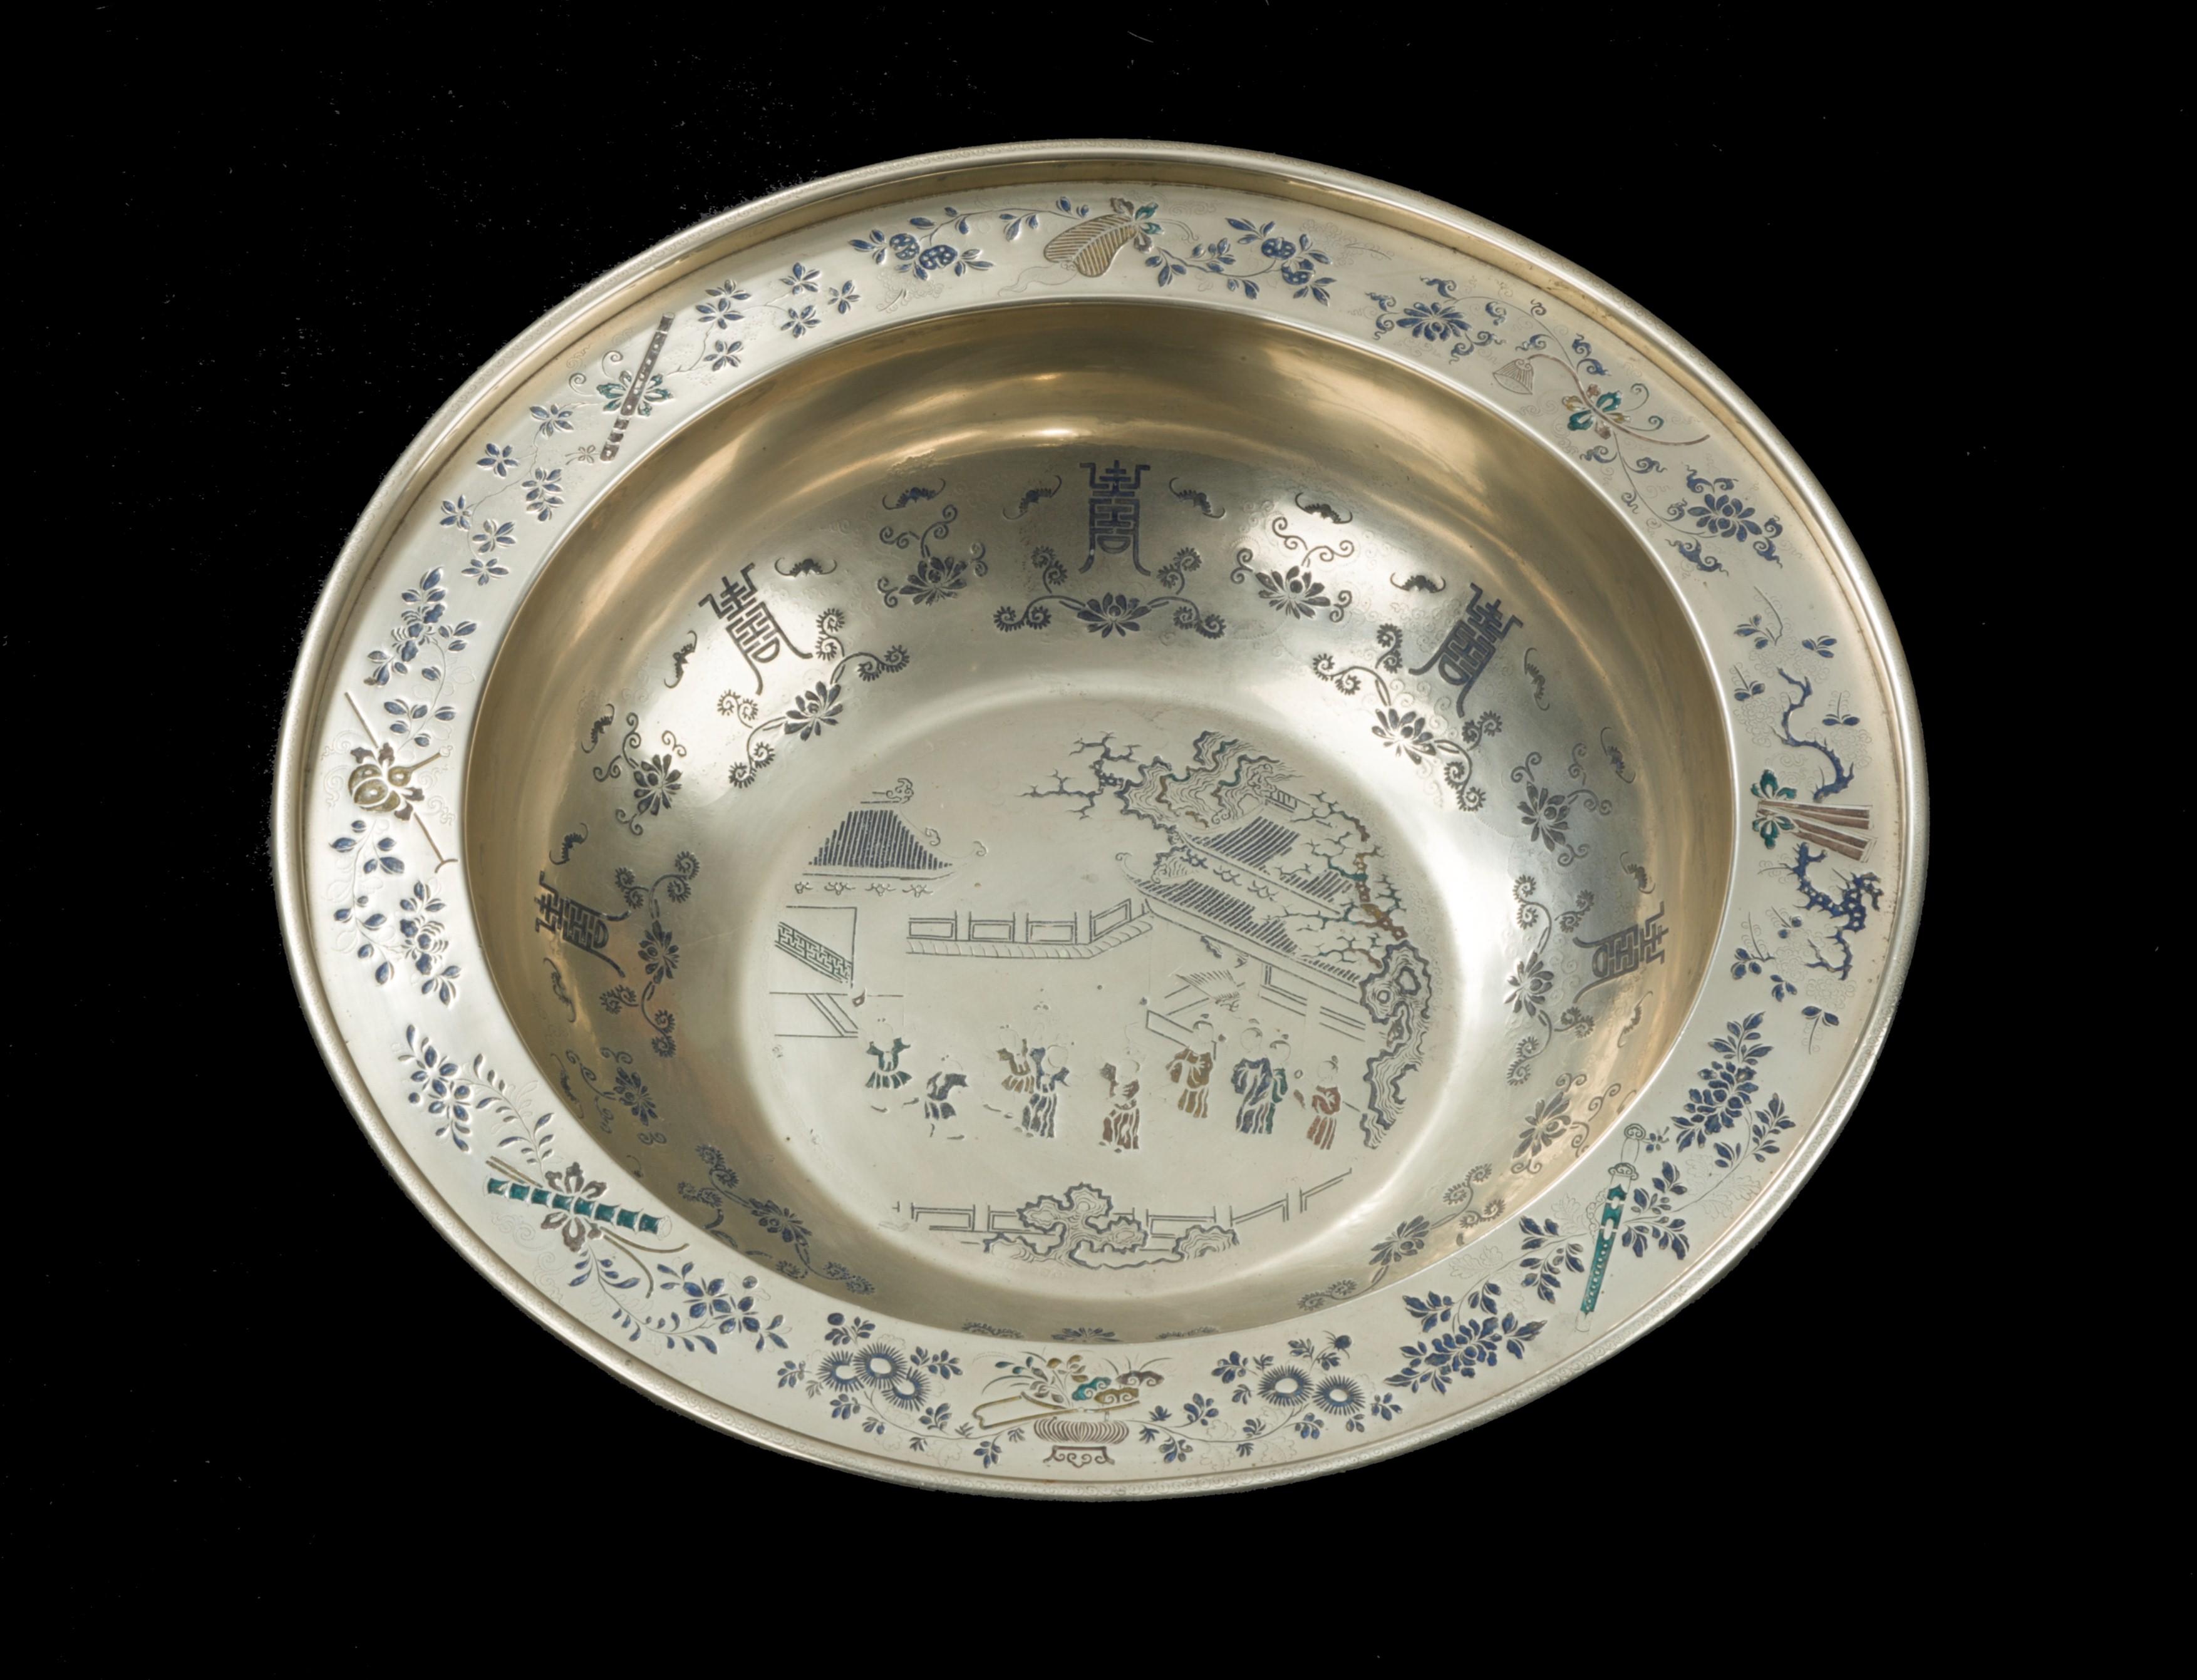 A Chinese paktong basin, engraved with scenes of many children at play and before pagodas, within borders of shou characters, bats and flowerheads, the flattened rim with vases of flowers and lingzhi, swords, lotus pods and other auspicious symbols,